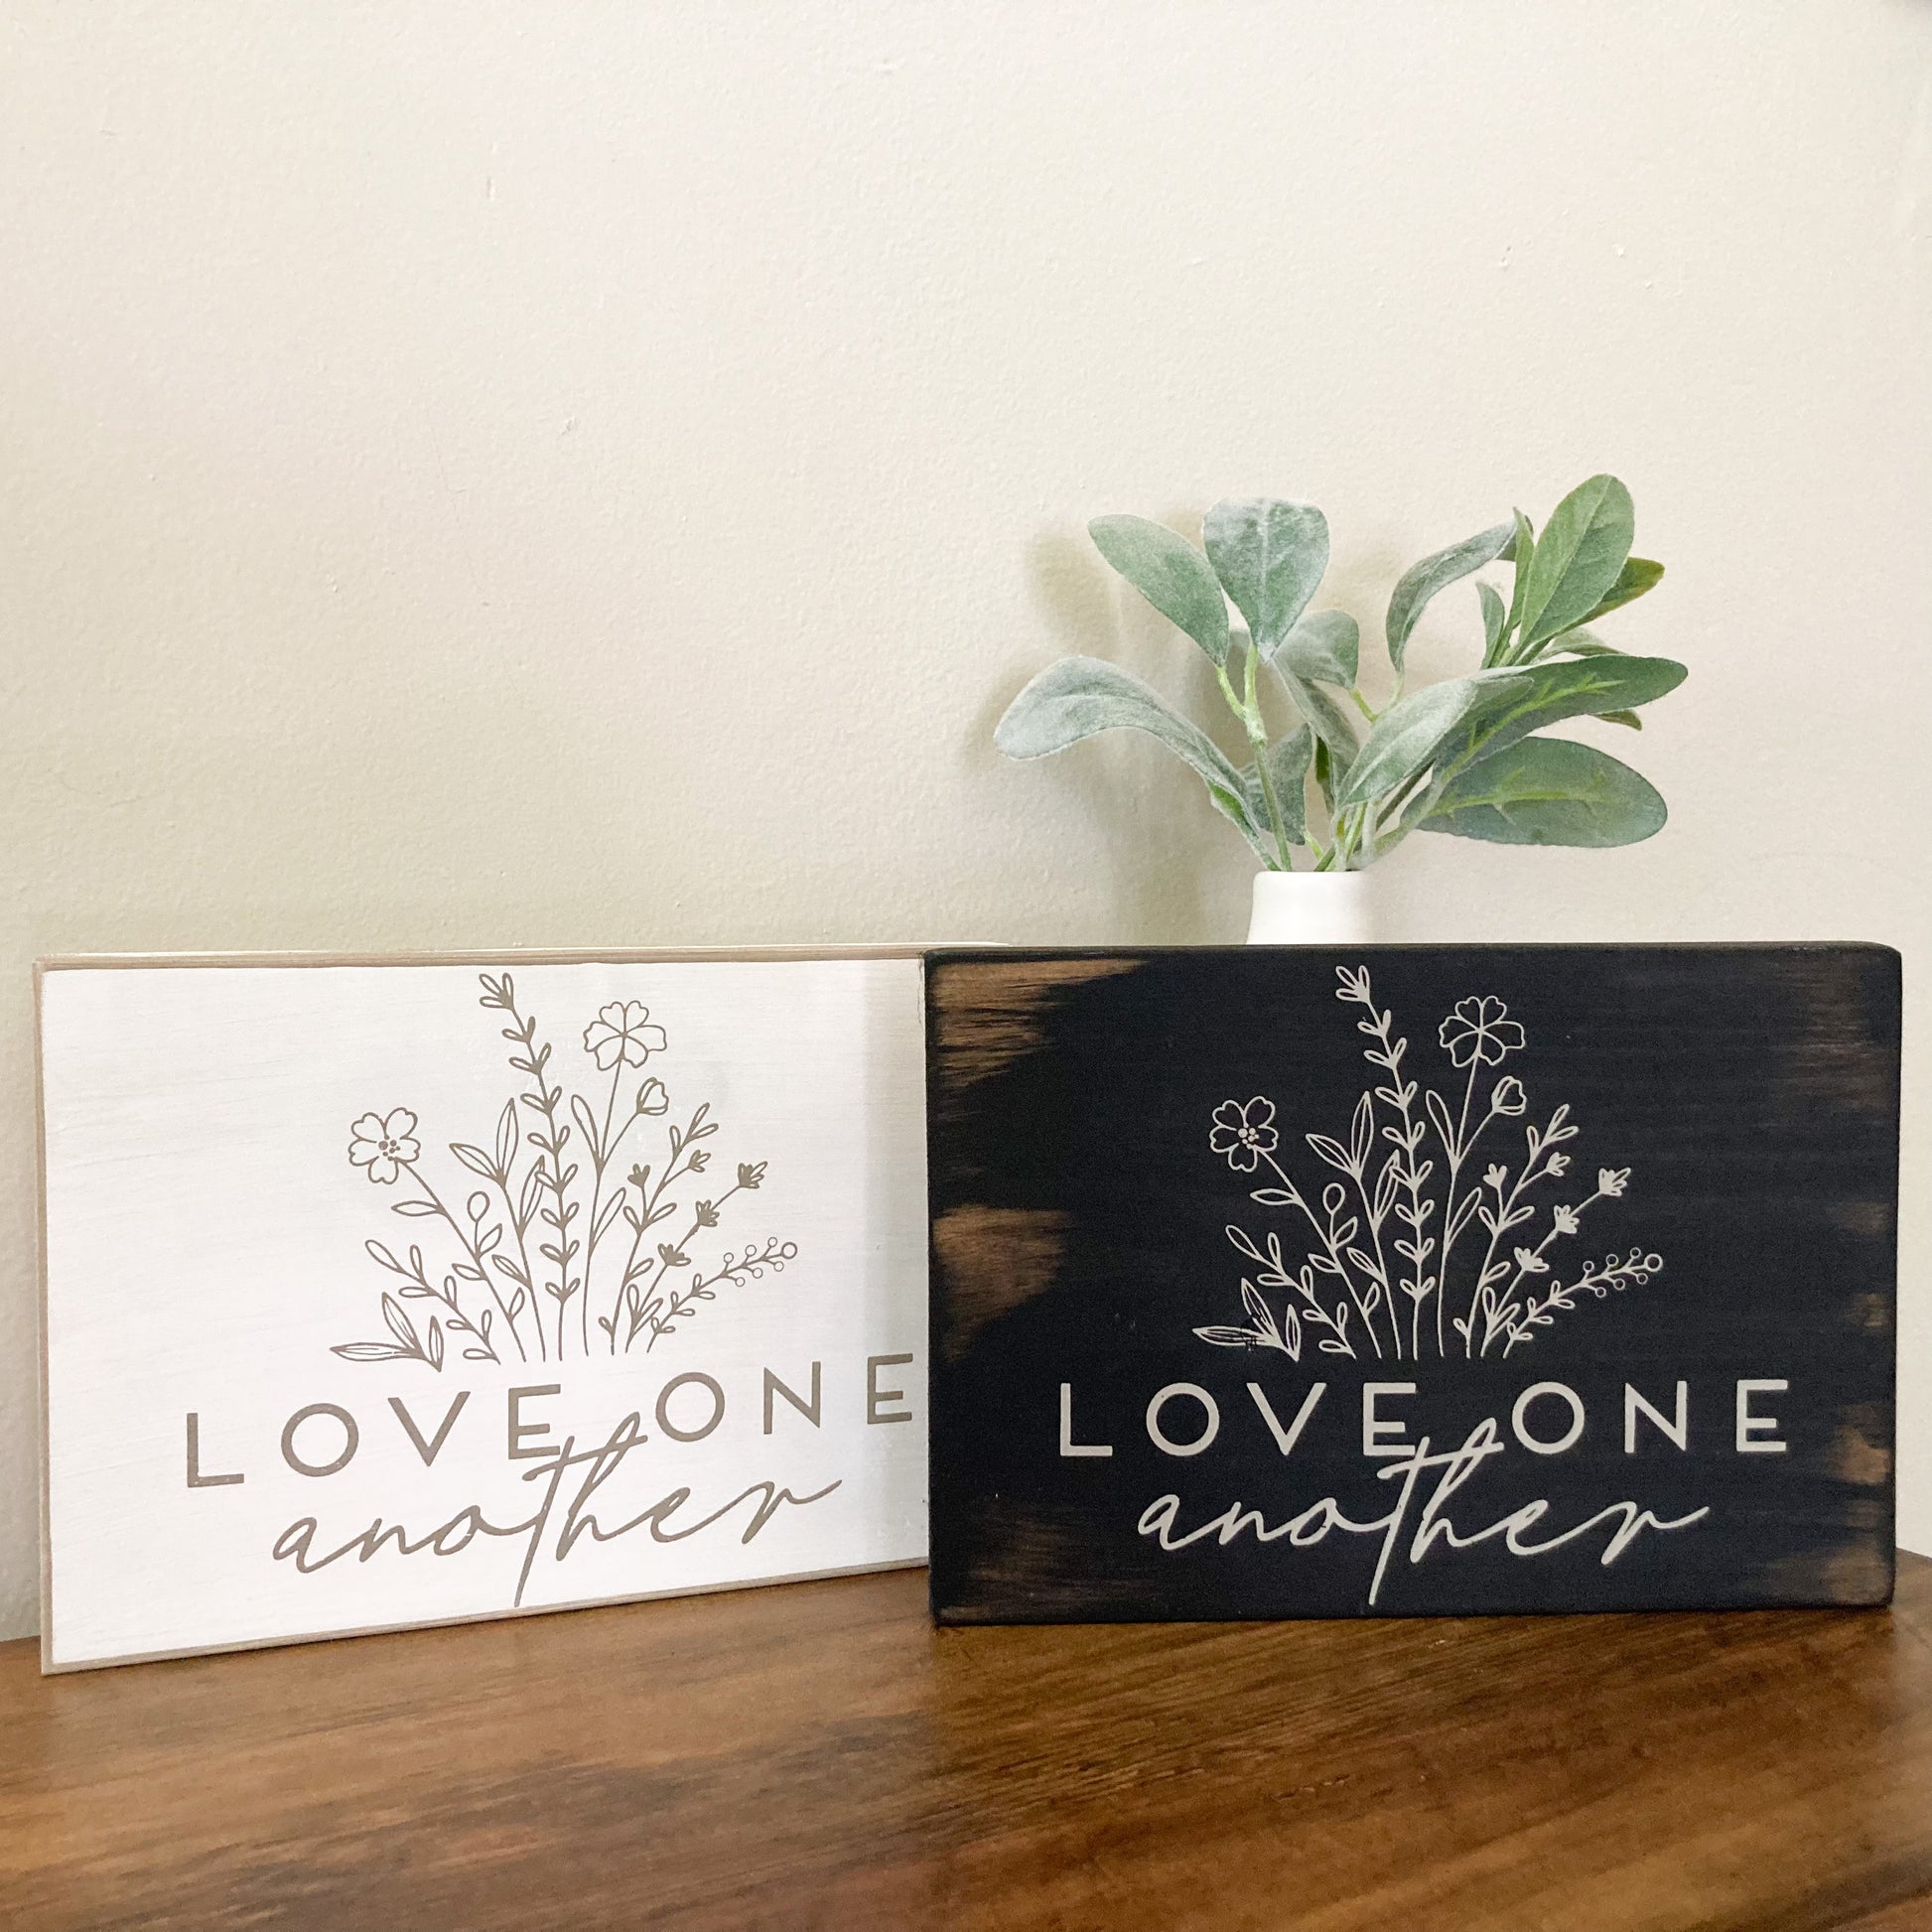 Handmade wood sign painted distressed with flowers and words saying love one another 5.5 inches by 8 inches comes in either black sign or white sign